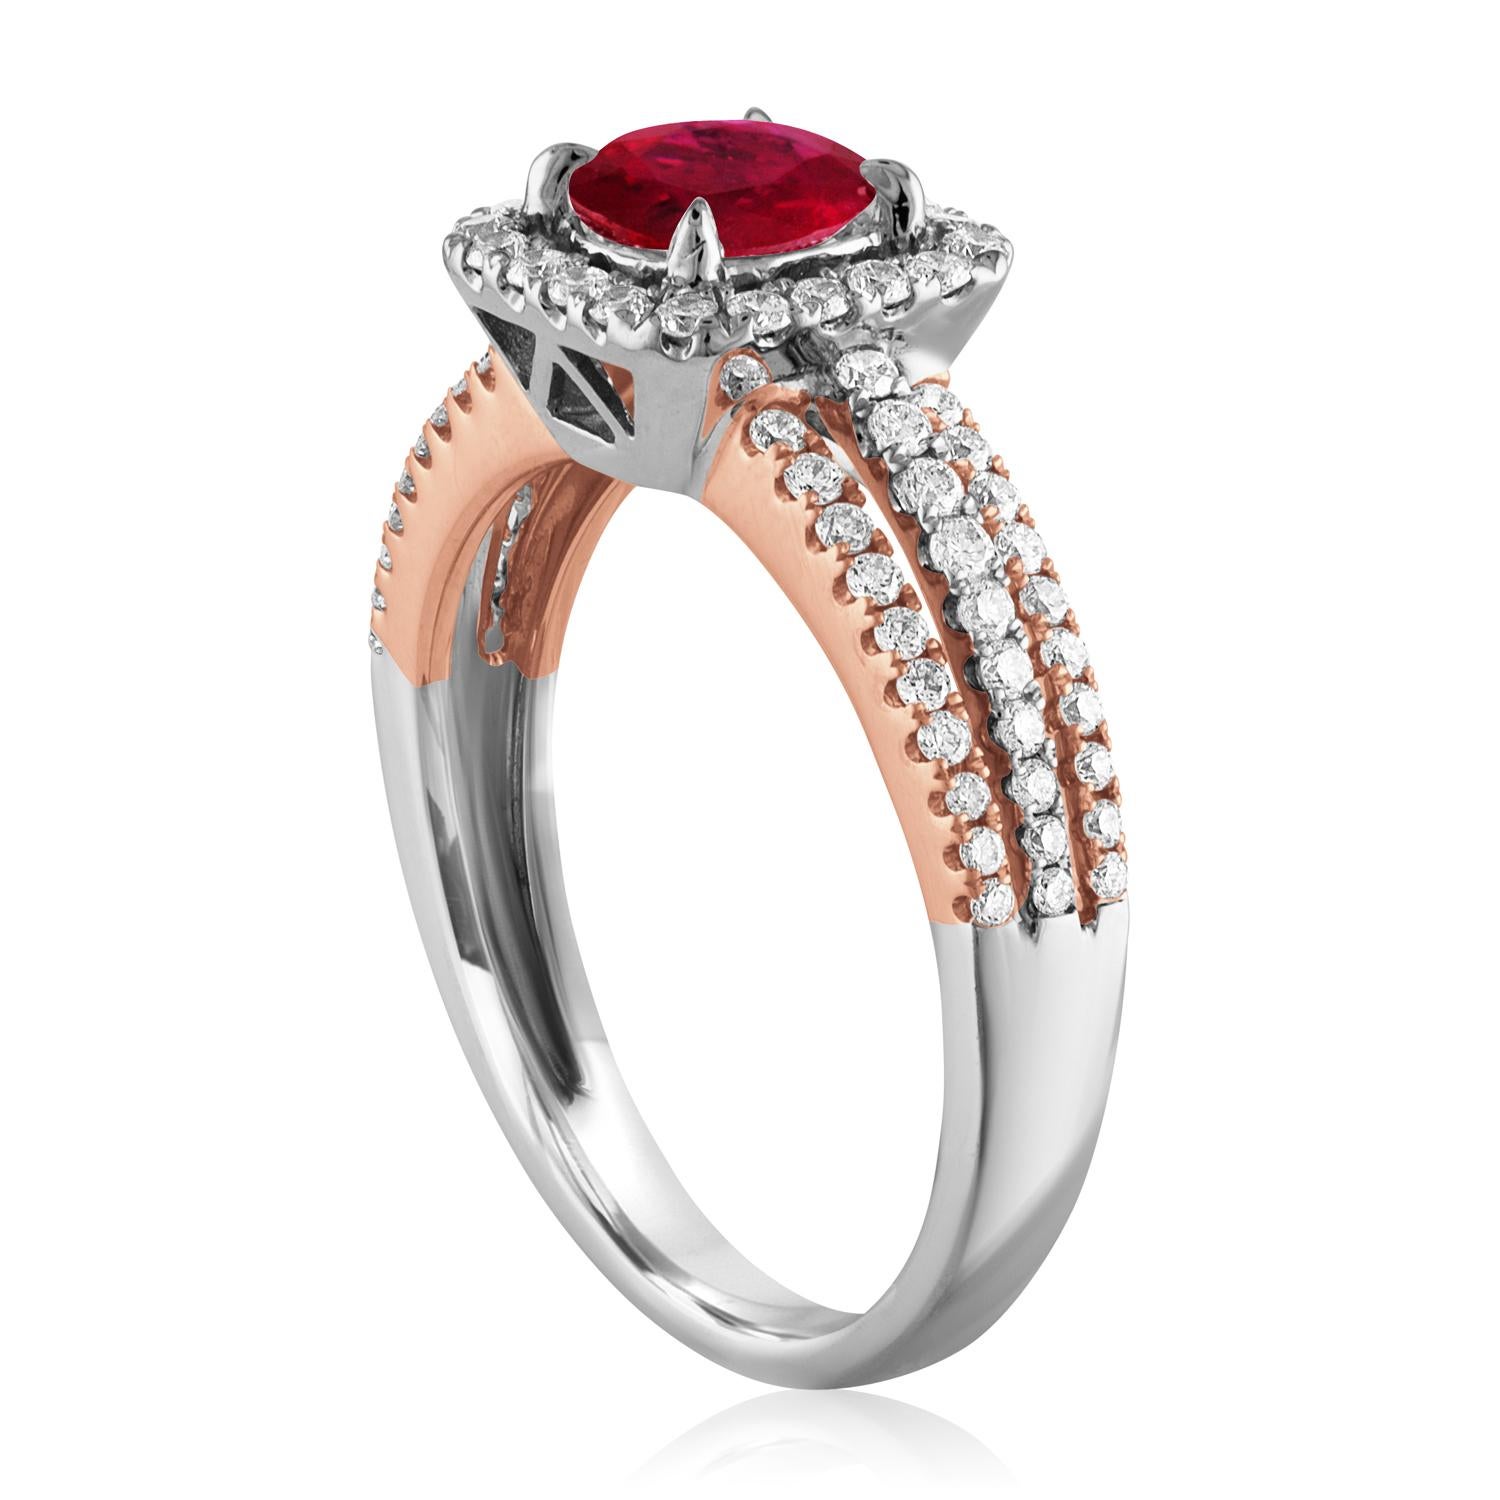 Beautiful Square Halo Two Tone Ring
The ring is 18K White & Rose Gold
The Center Stone is a Round Ruby 0.81 Carats
The Ruby is AGL Certified Heated
There are 0.52 Carats in Diamonds F/G VS/SI
The ring is a size 6.5, sizable.
The ring weighs 4.4 grams